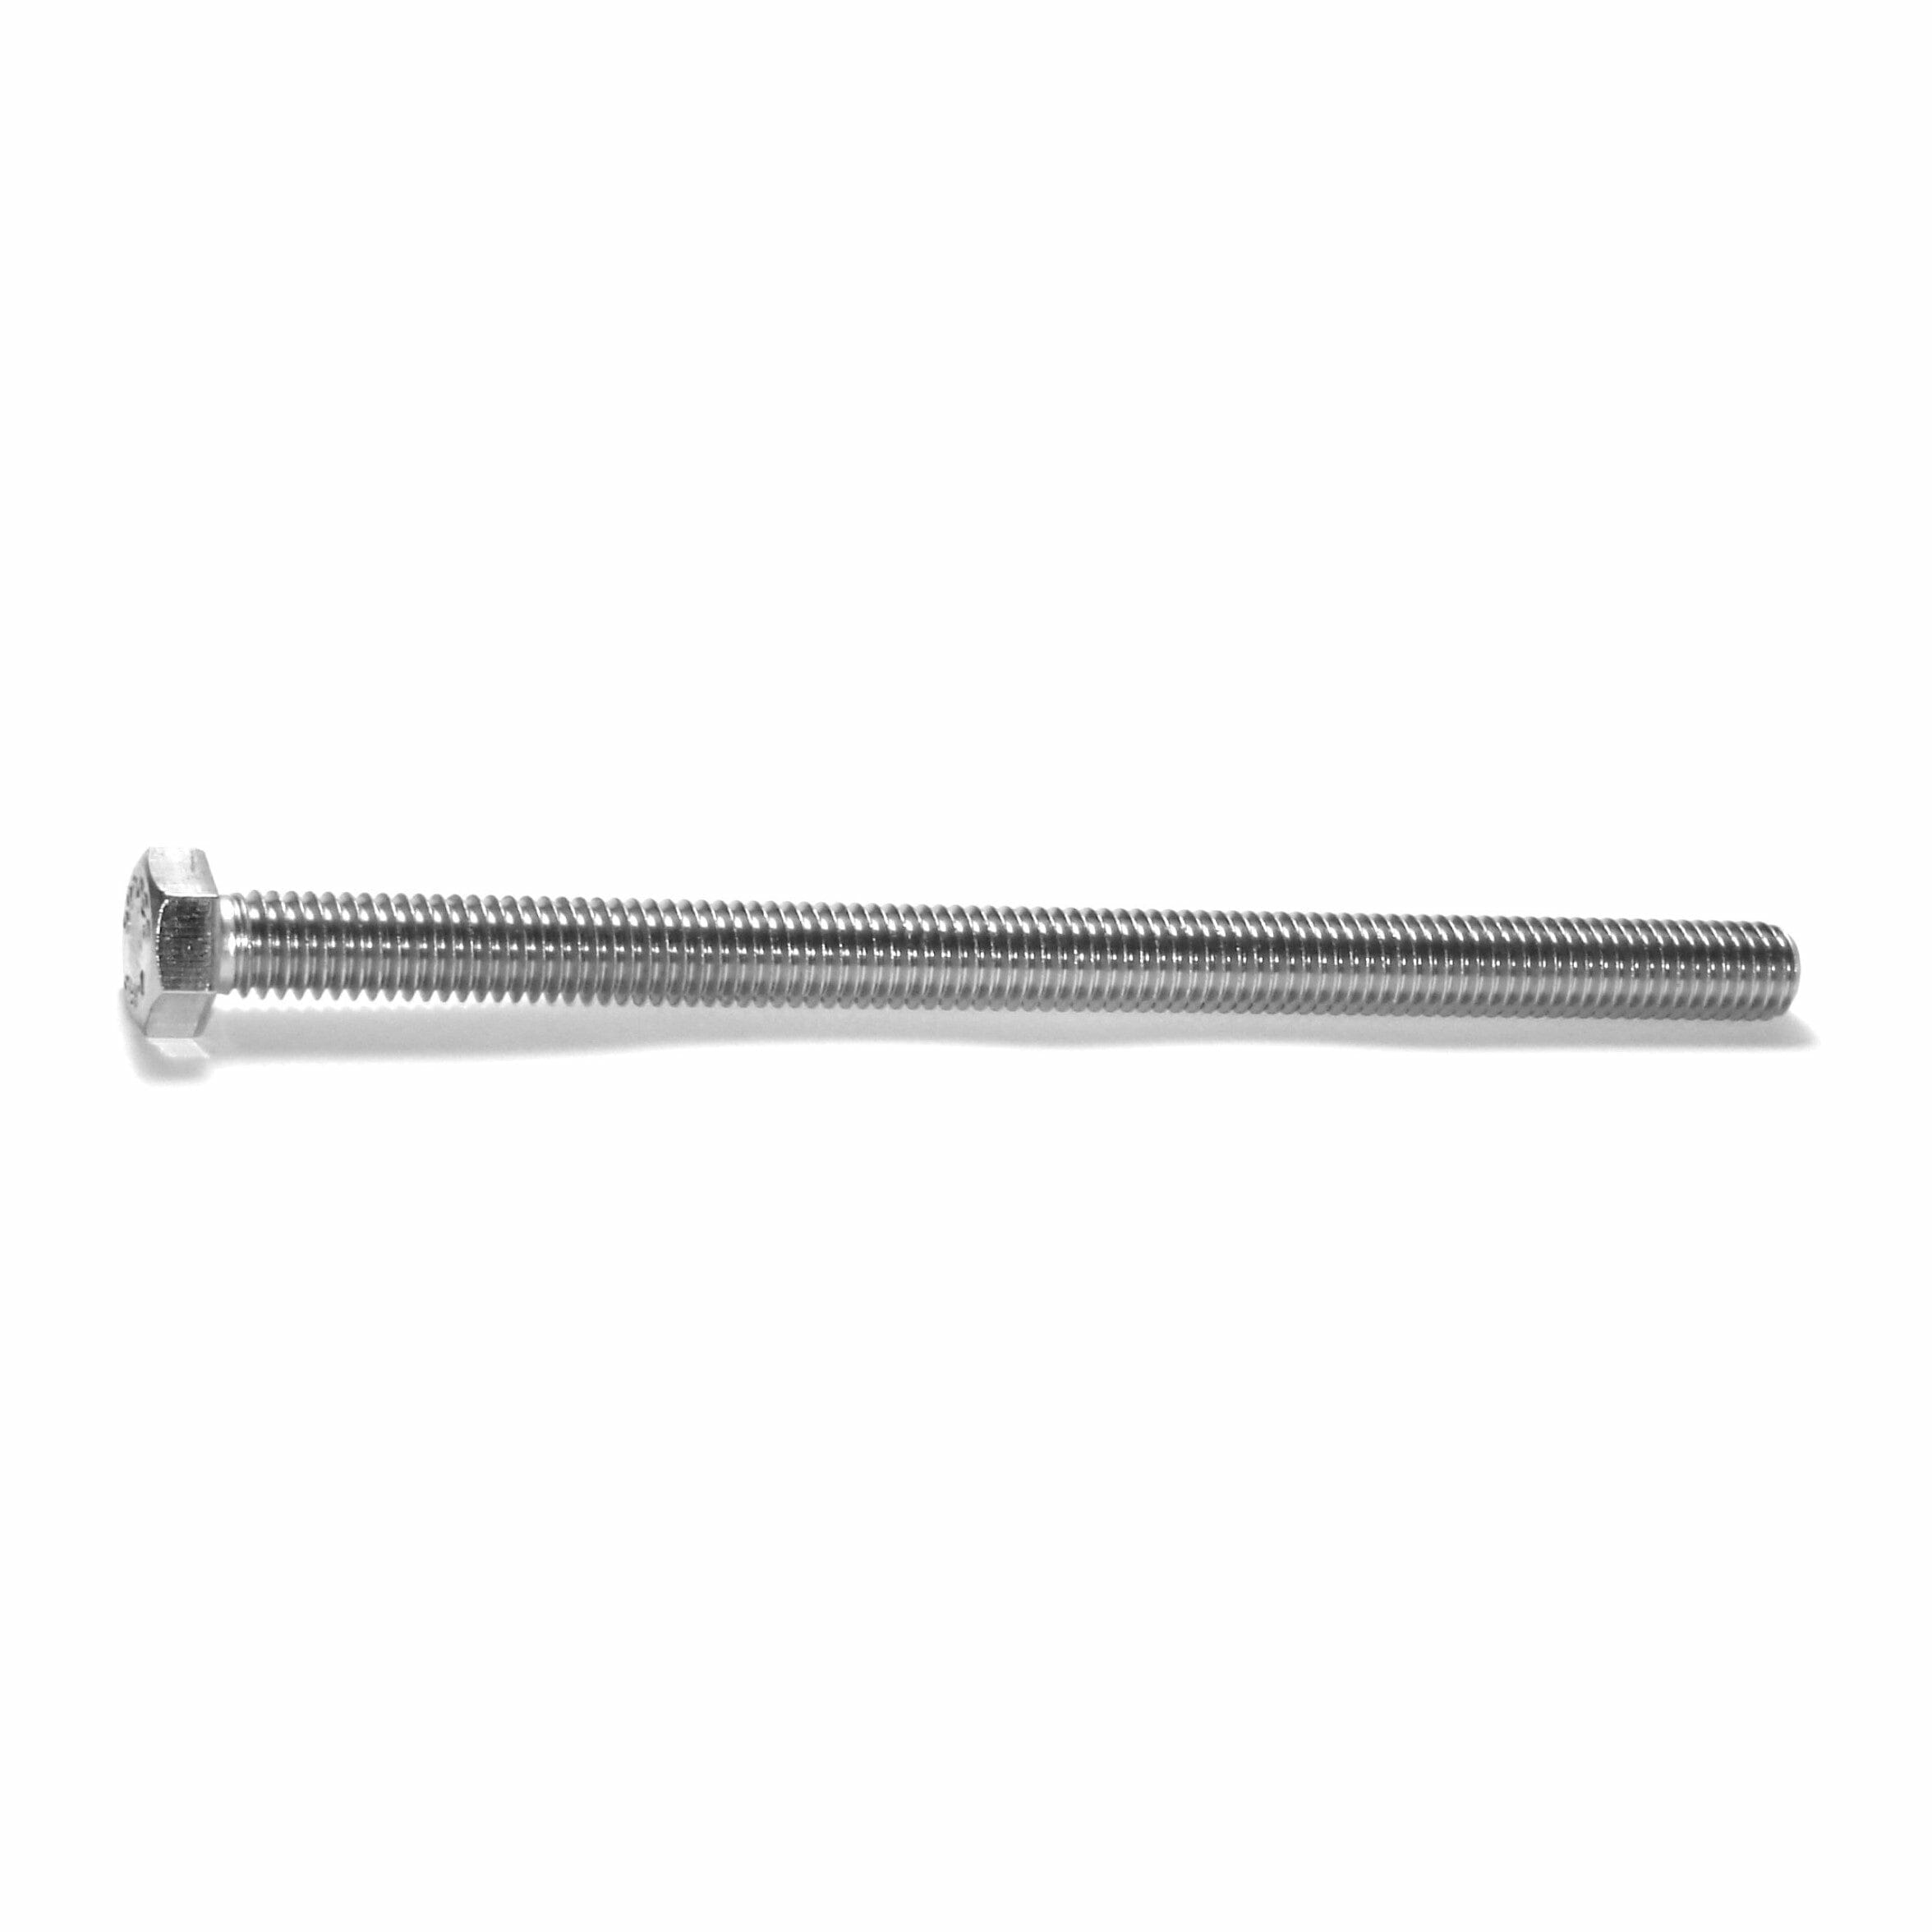 Fasteners, Bolts,3/8″-16 x 6″, Stainless Steel Hex Bolts